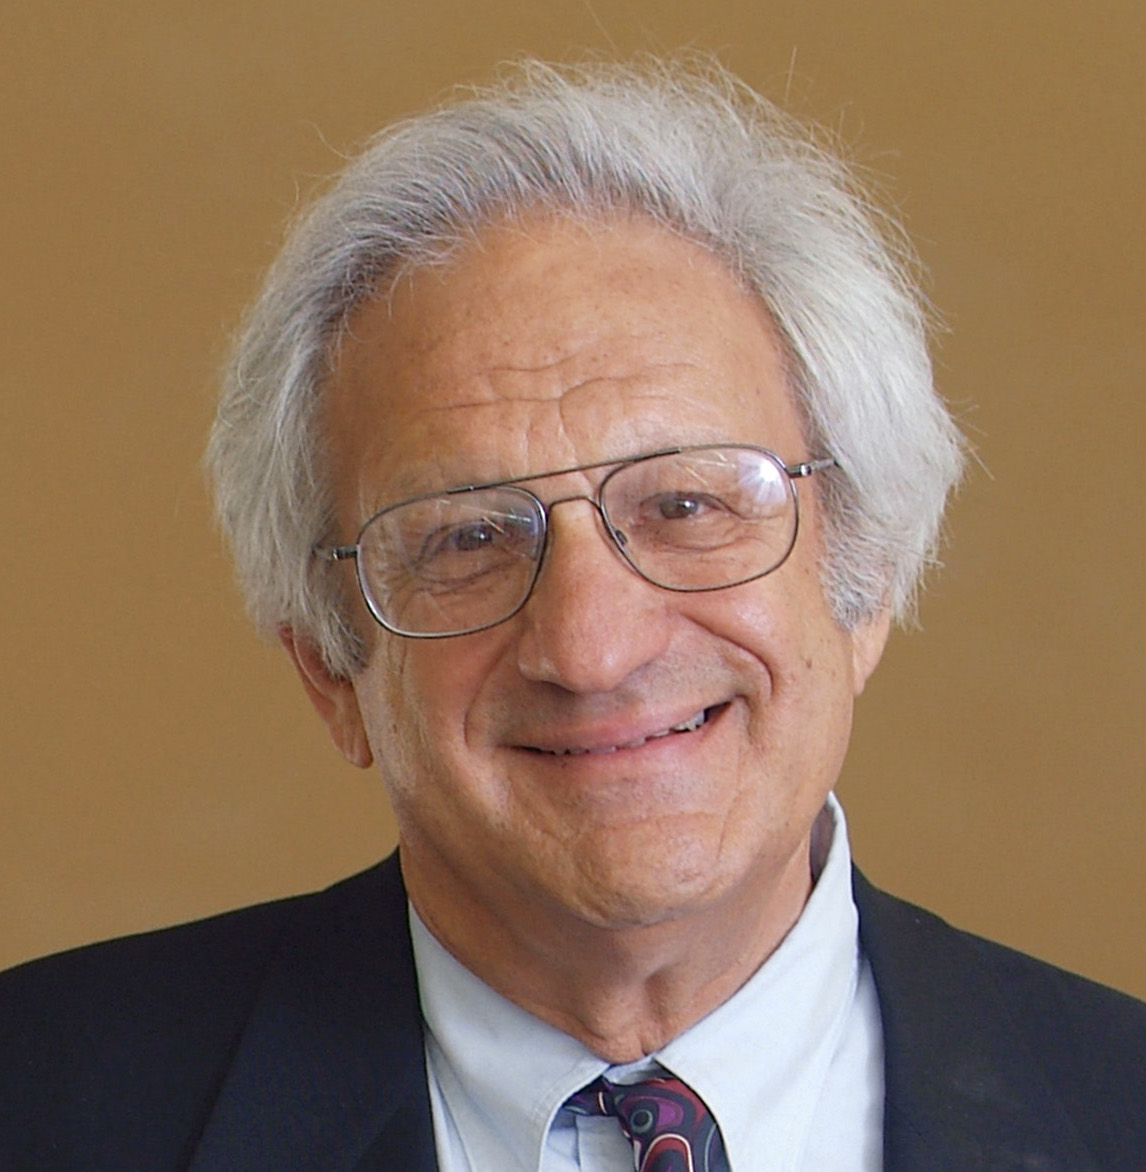 Man in glasses and tie smiling